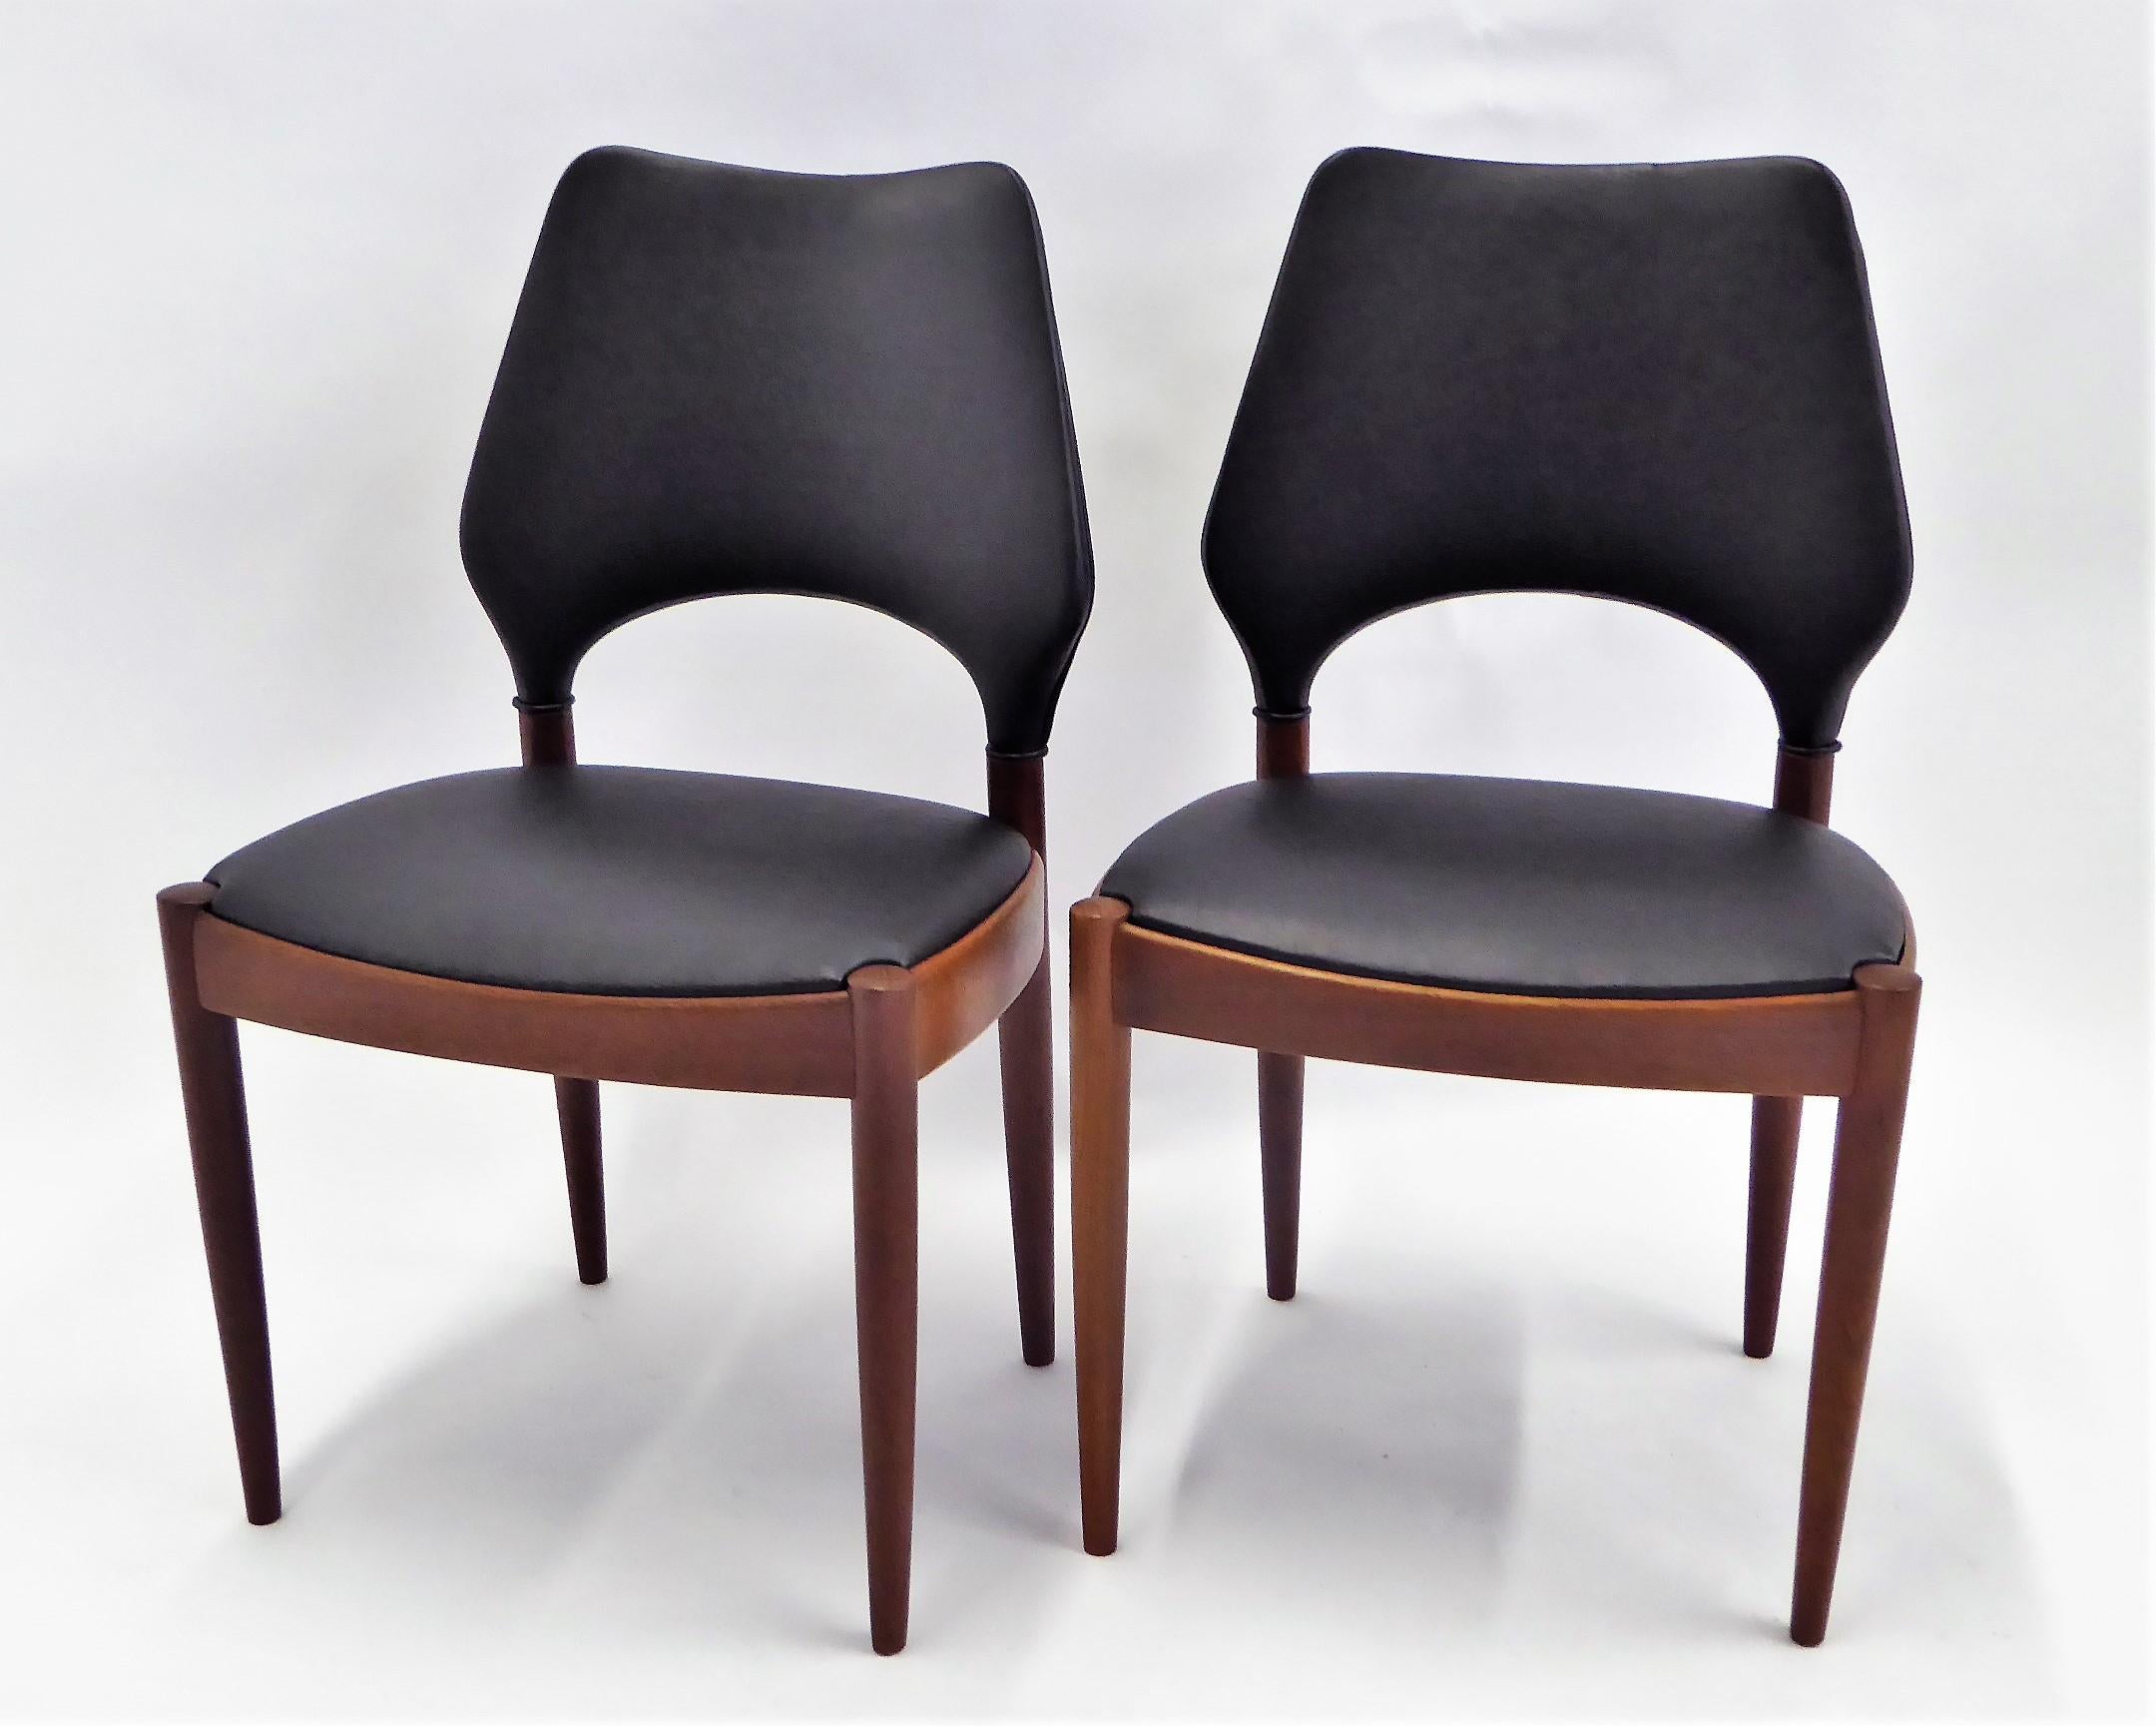 REDUCED FROM $1,950...A fine pair and very rarely seen teak side or dining chairs by Arne Hovmand Olsen in 1958 for Mogens Kold Mobilfabrik in Denmark. Beautiful older teak. Re-upholstered in leatherette. The chairs have an exceptionally designed